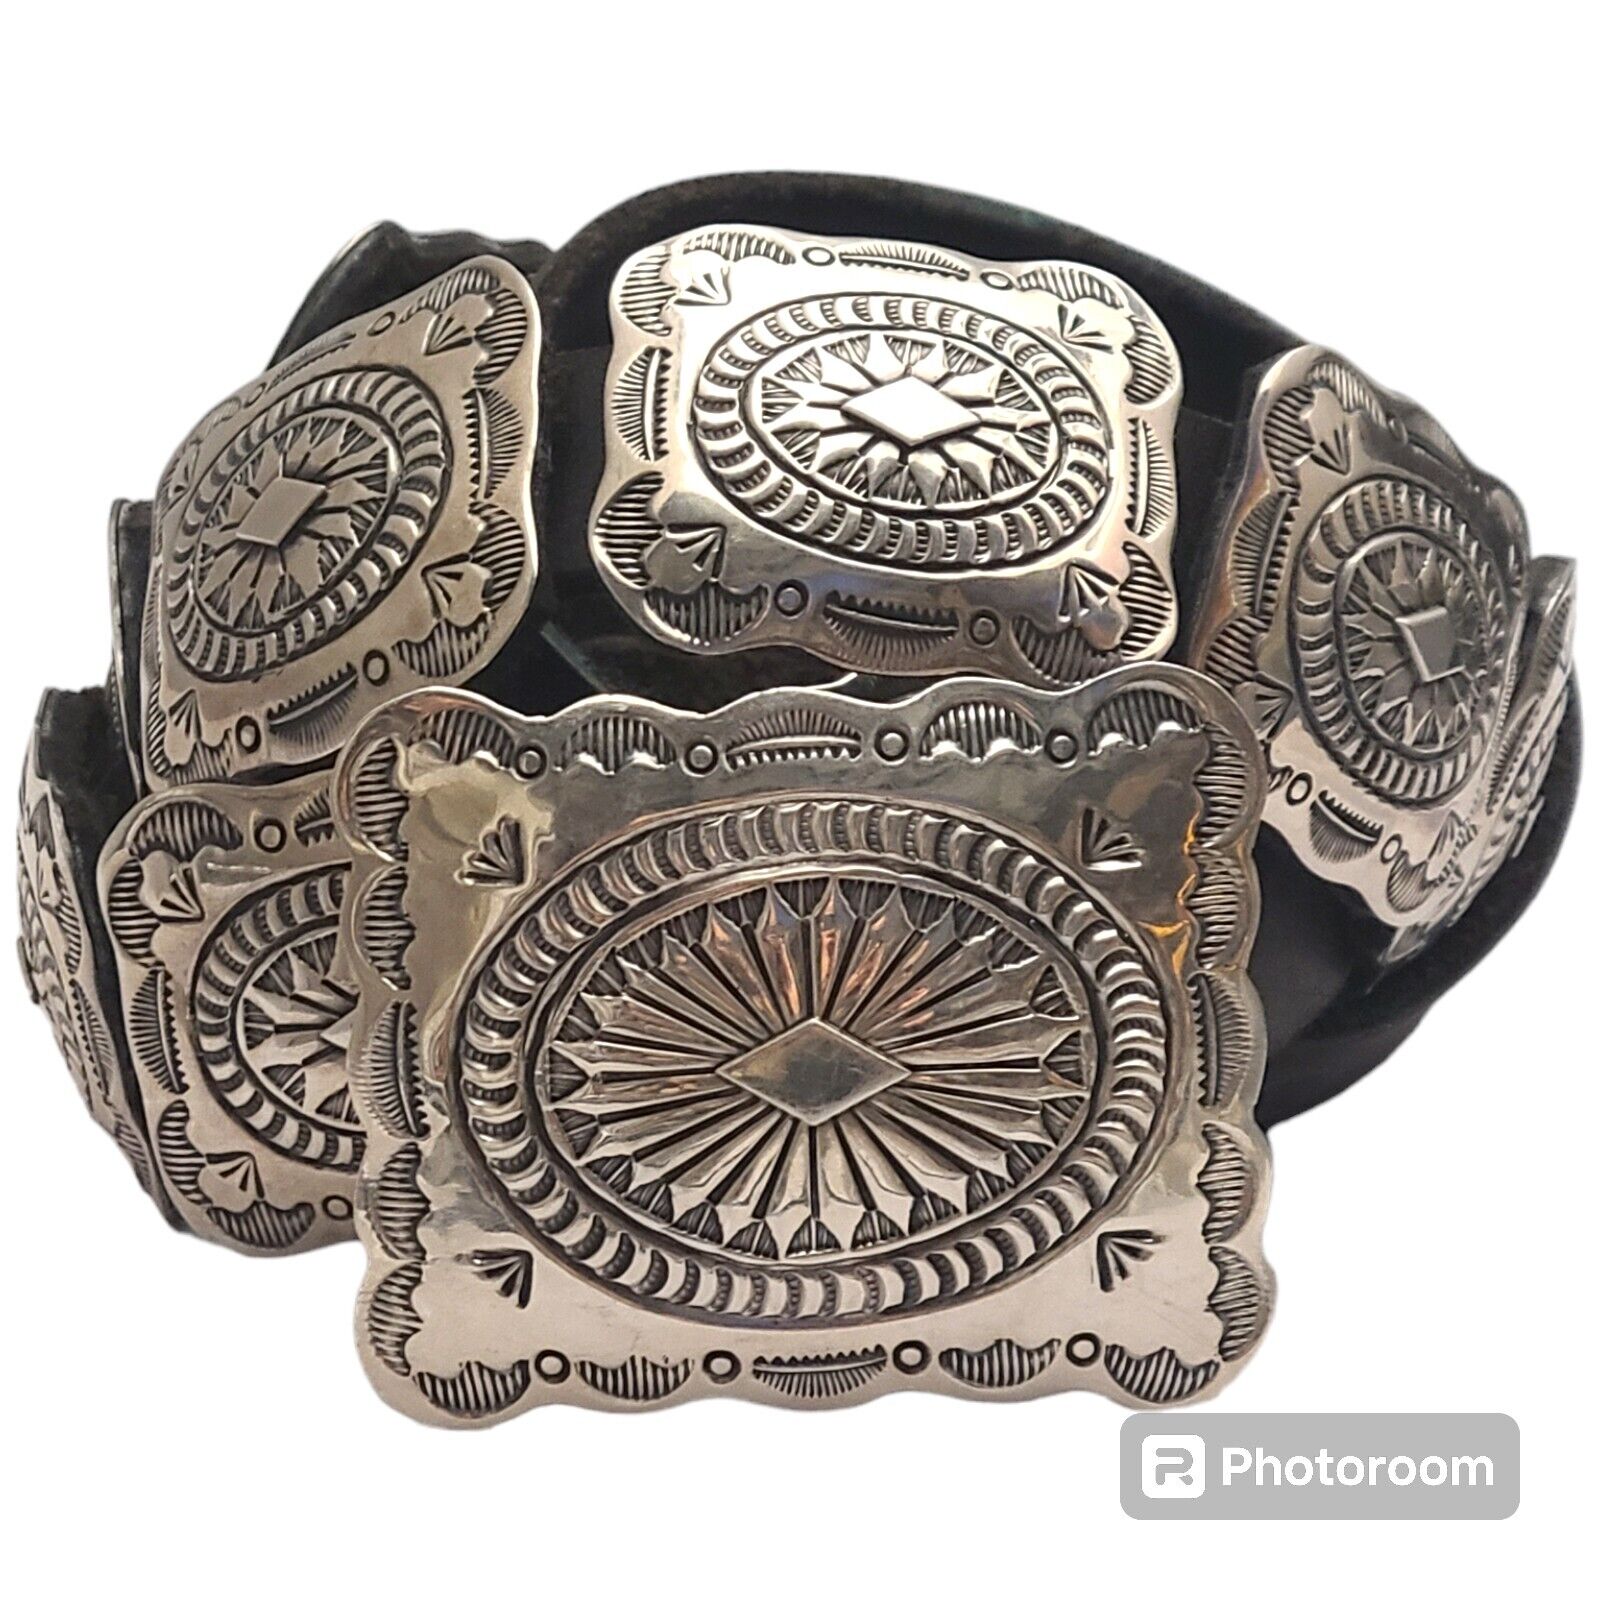 DETAILED VINTAGE NAVAJO Lucille Ramone STERLING SILVER REPOUSSED CONCHO BELT 